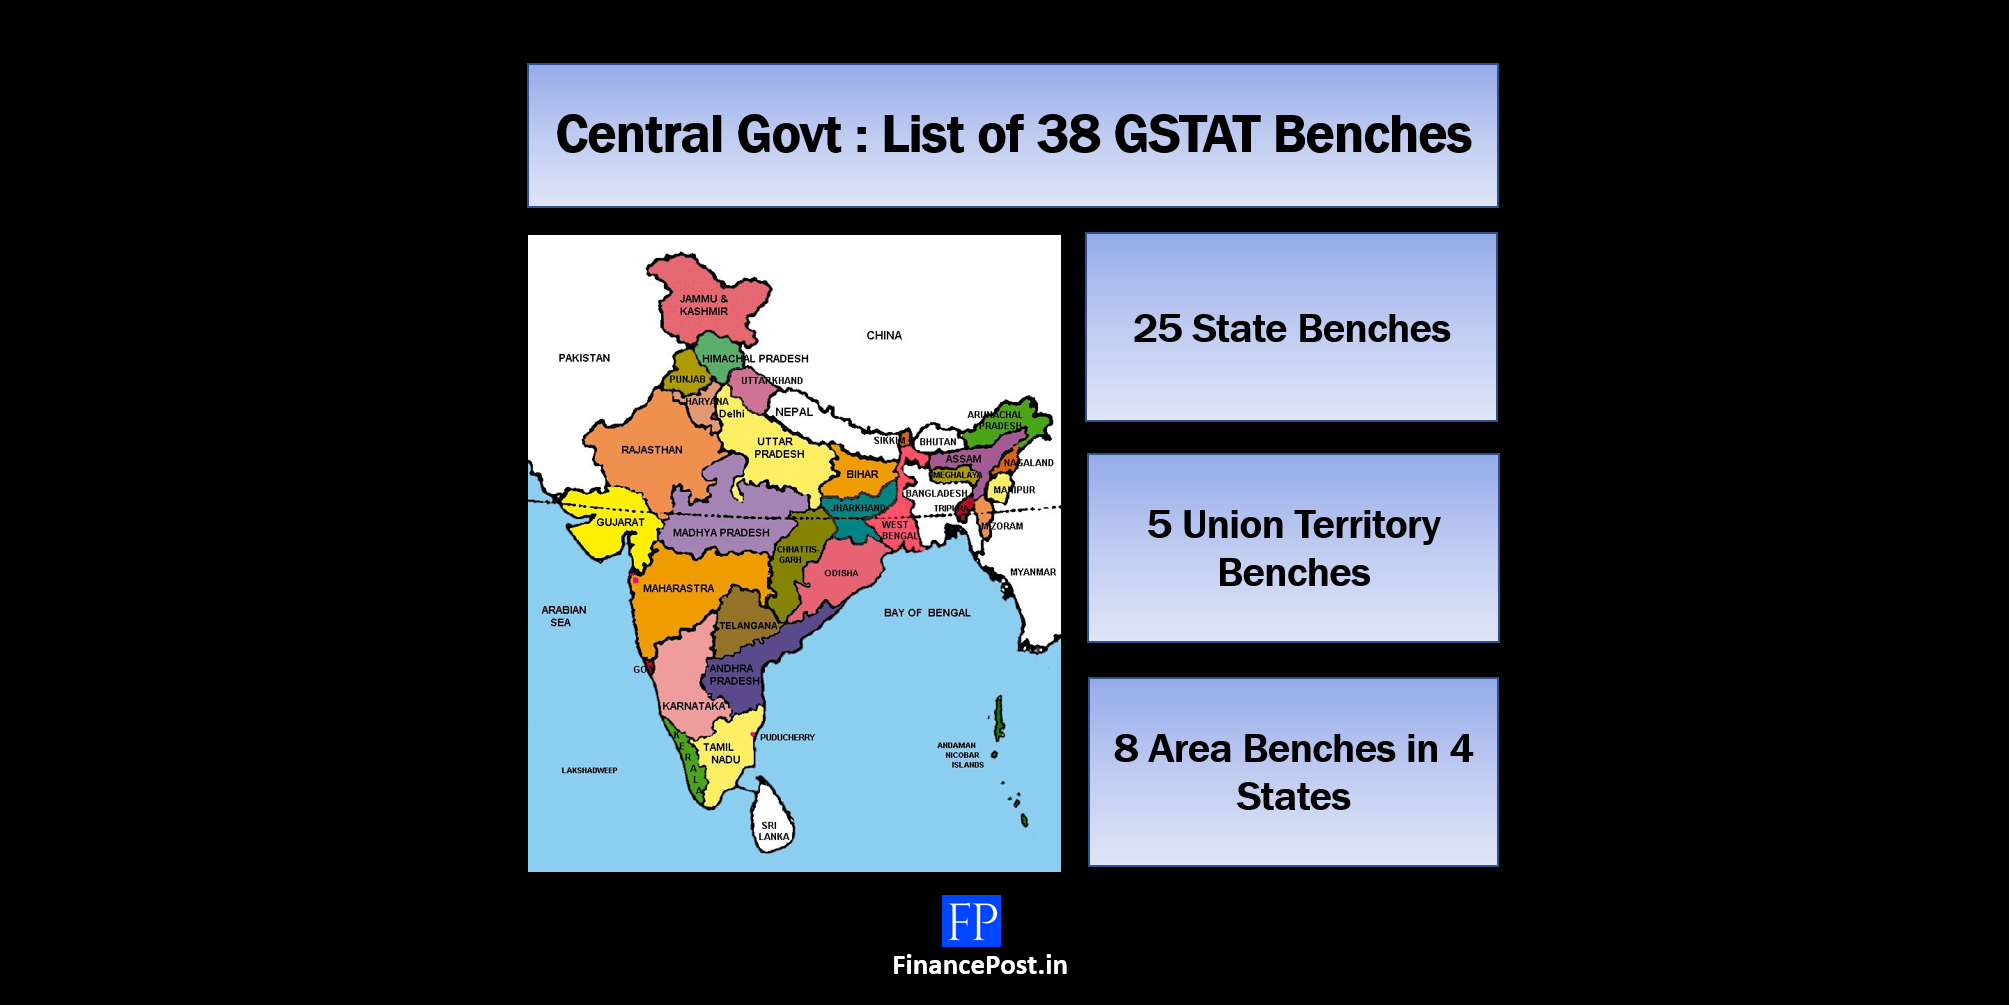 Central Govt: List of 38 GSTAT Benches